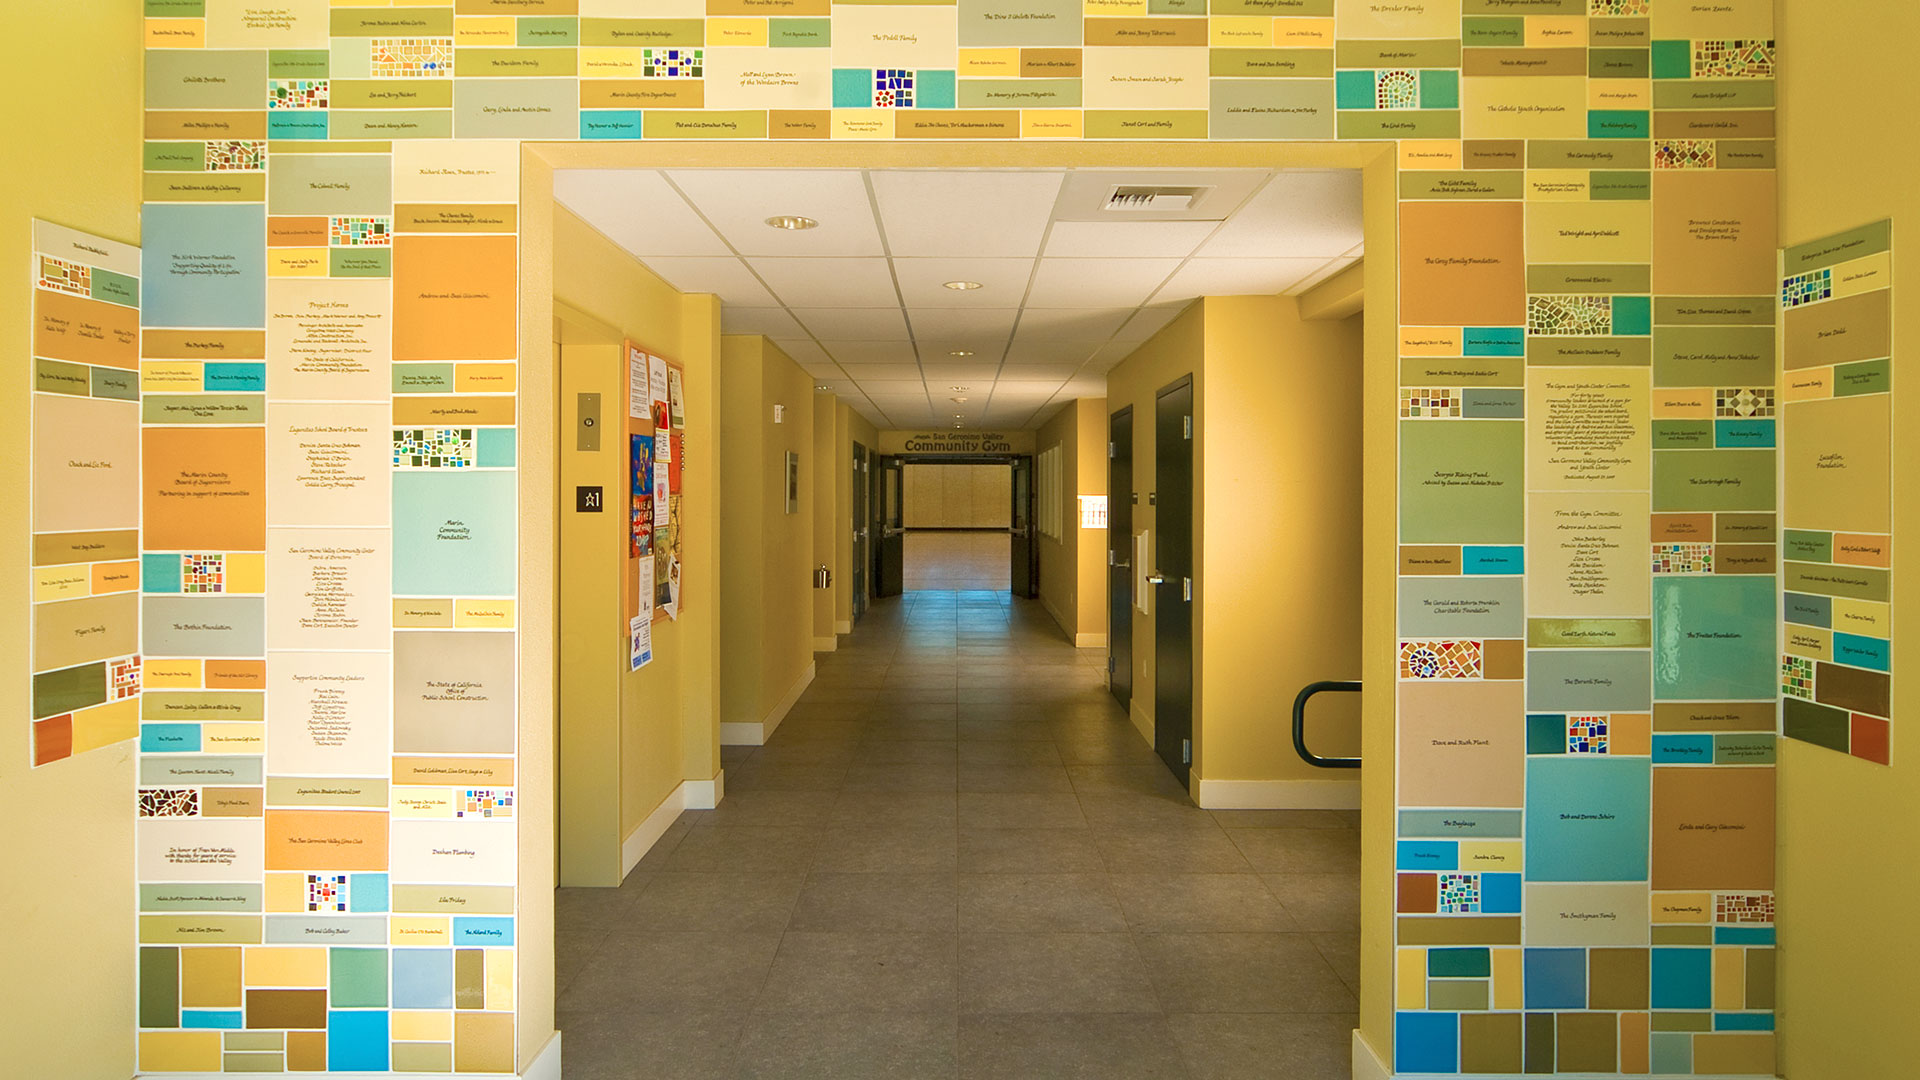 Entryway interior and archway of multicolored tiles with text.